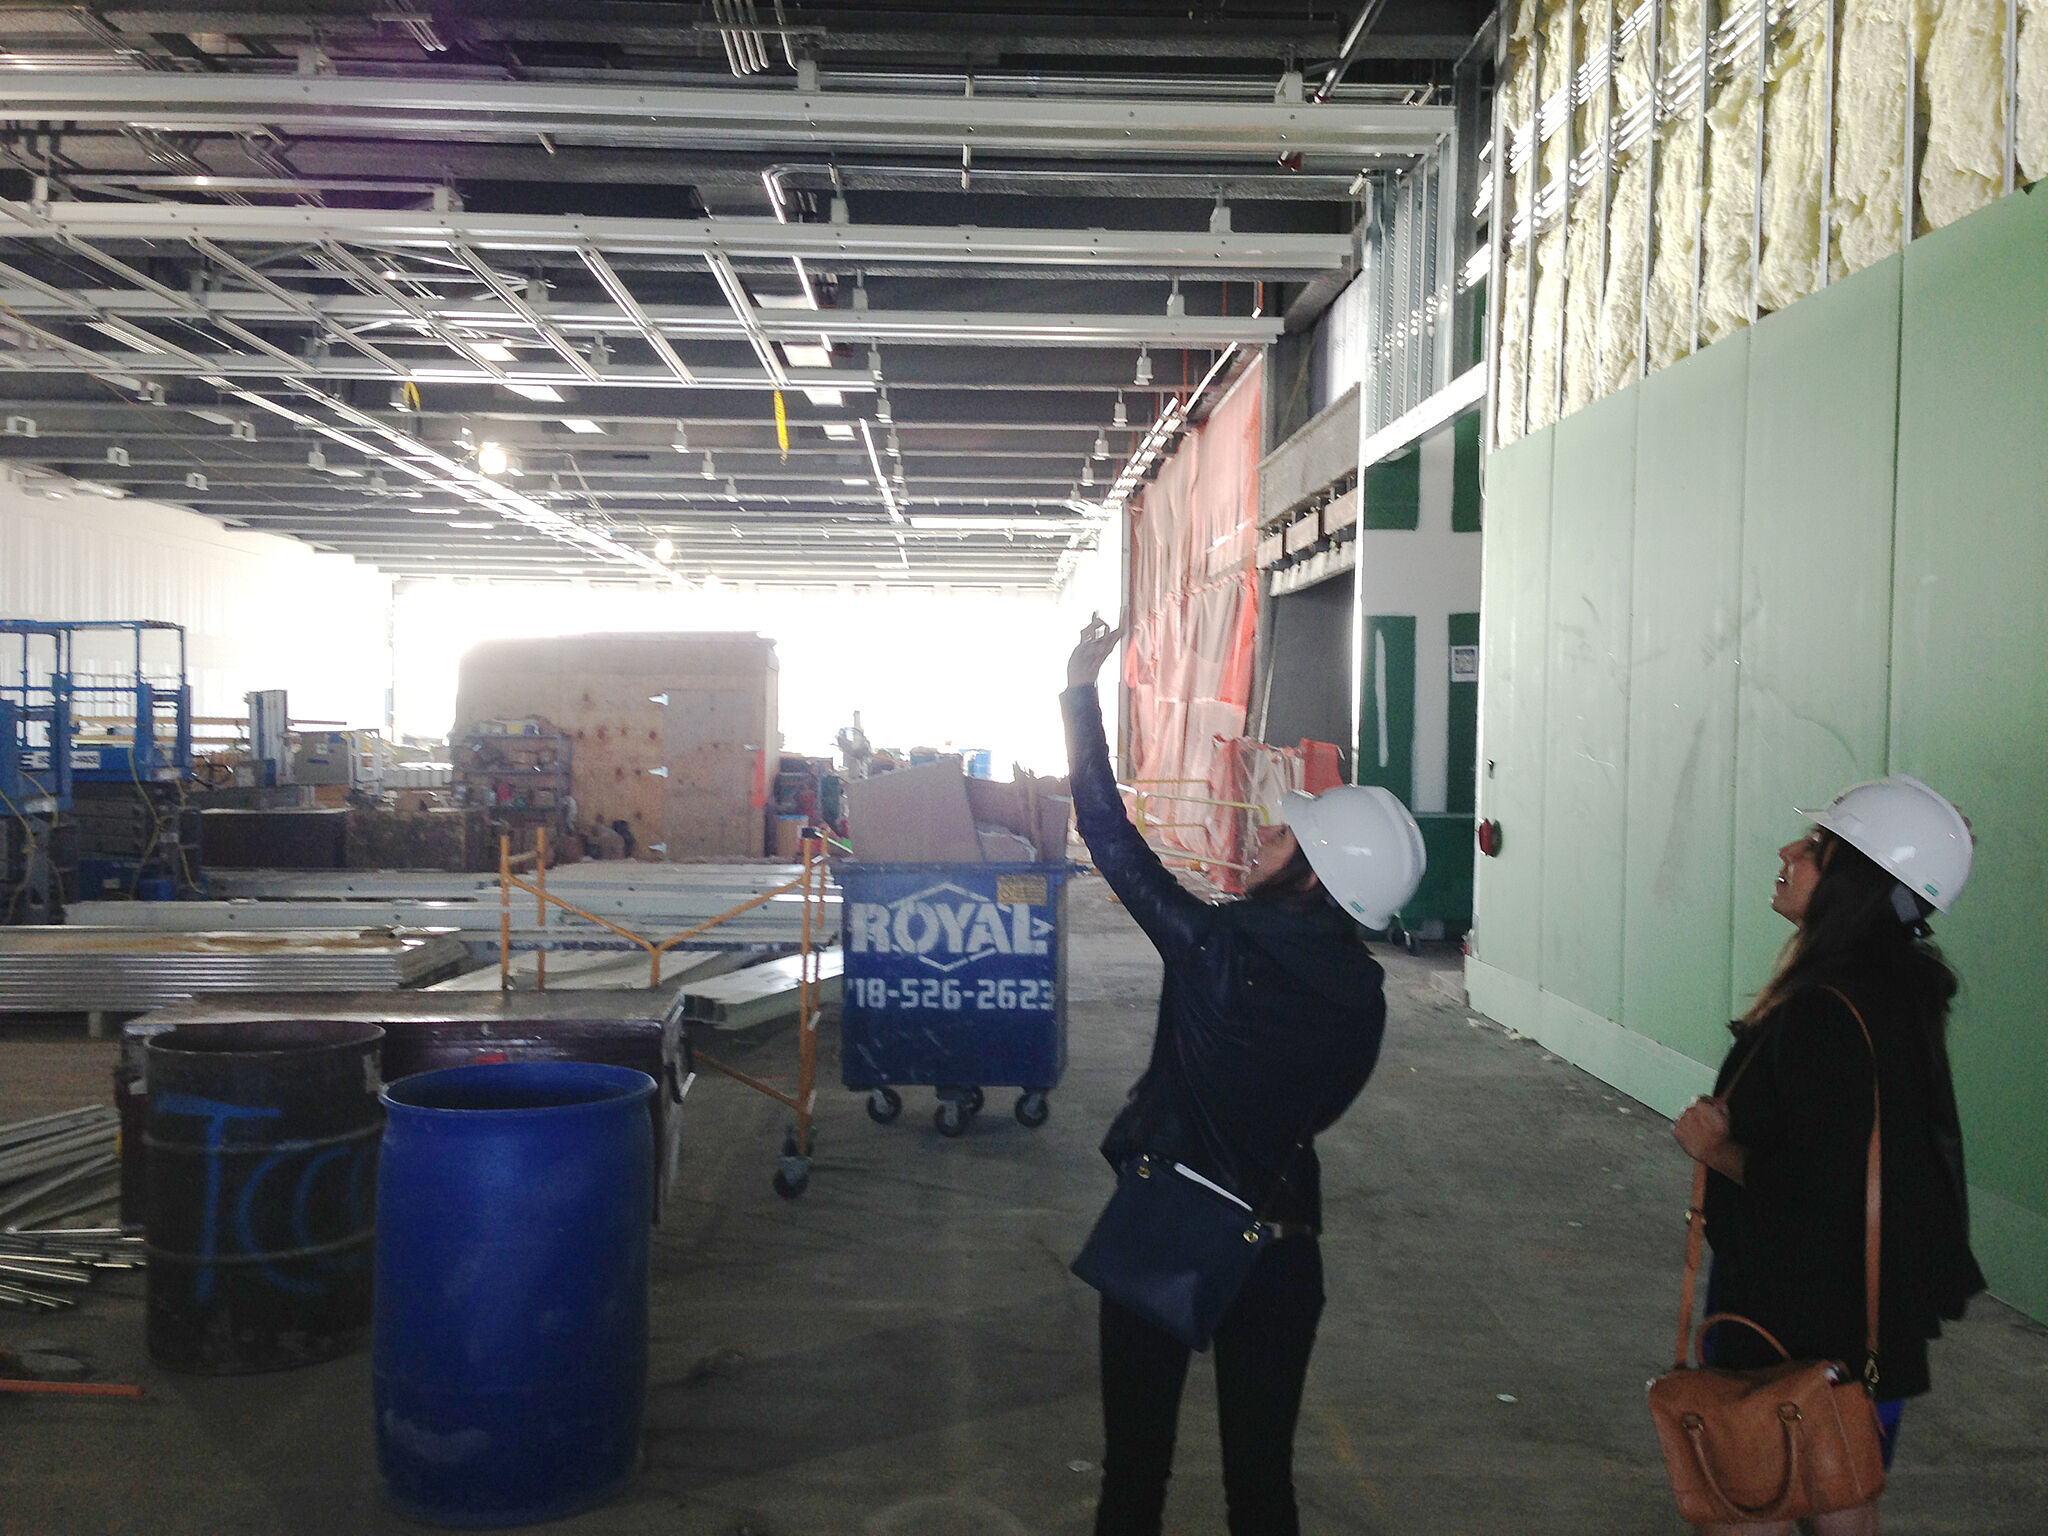 Touring the fifth floor of the new Whitney building